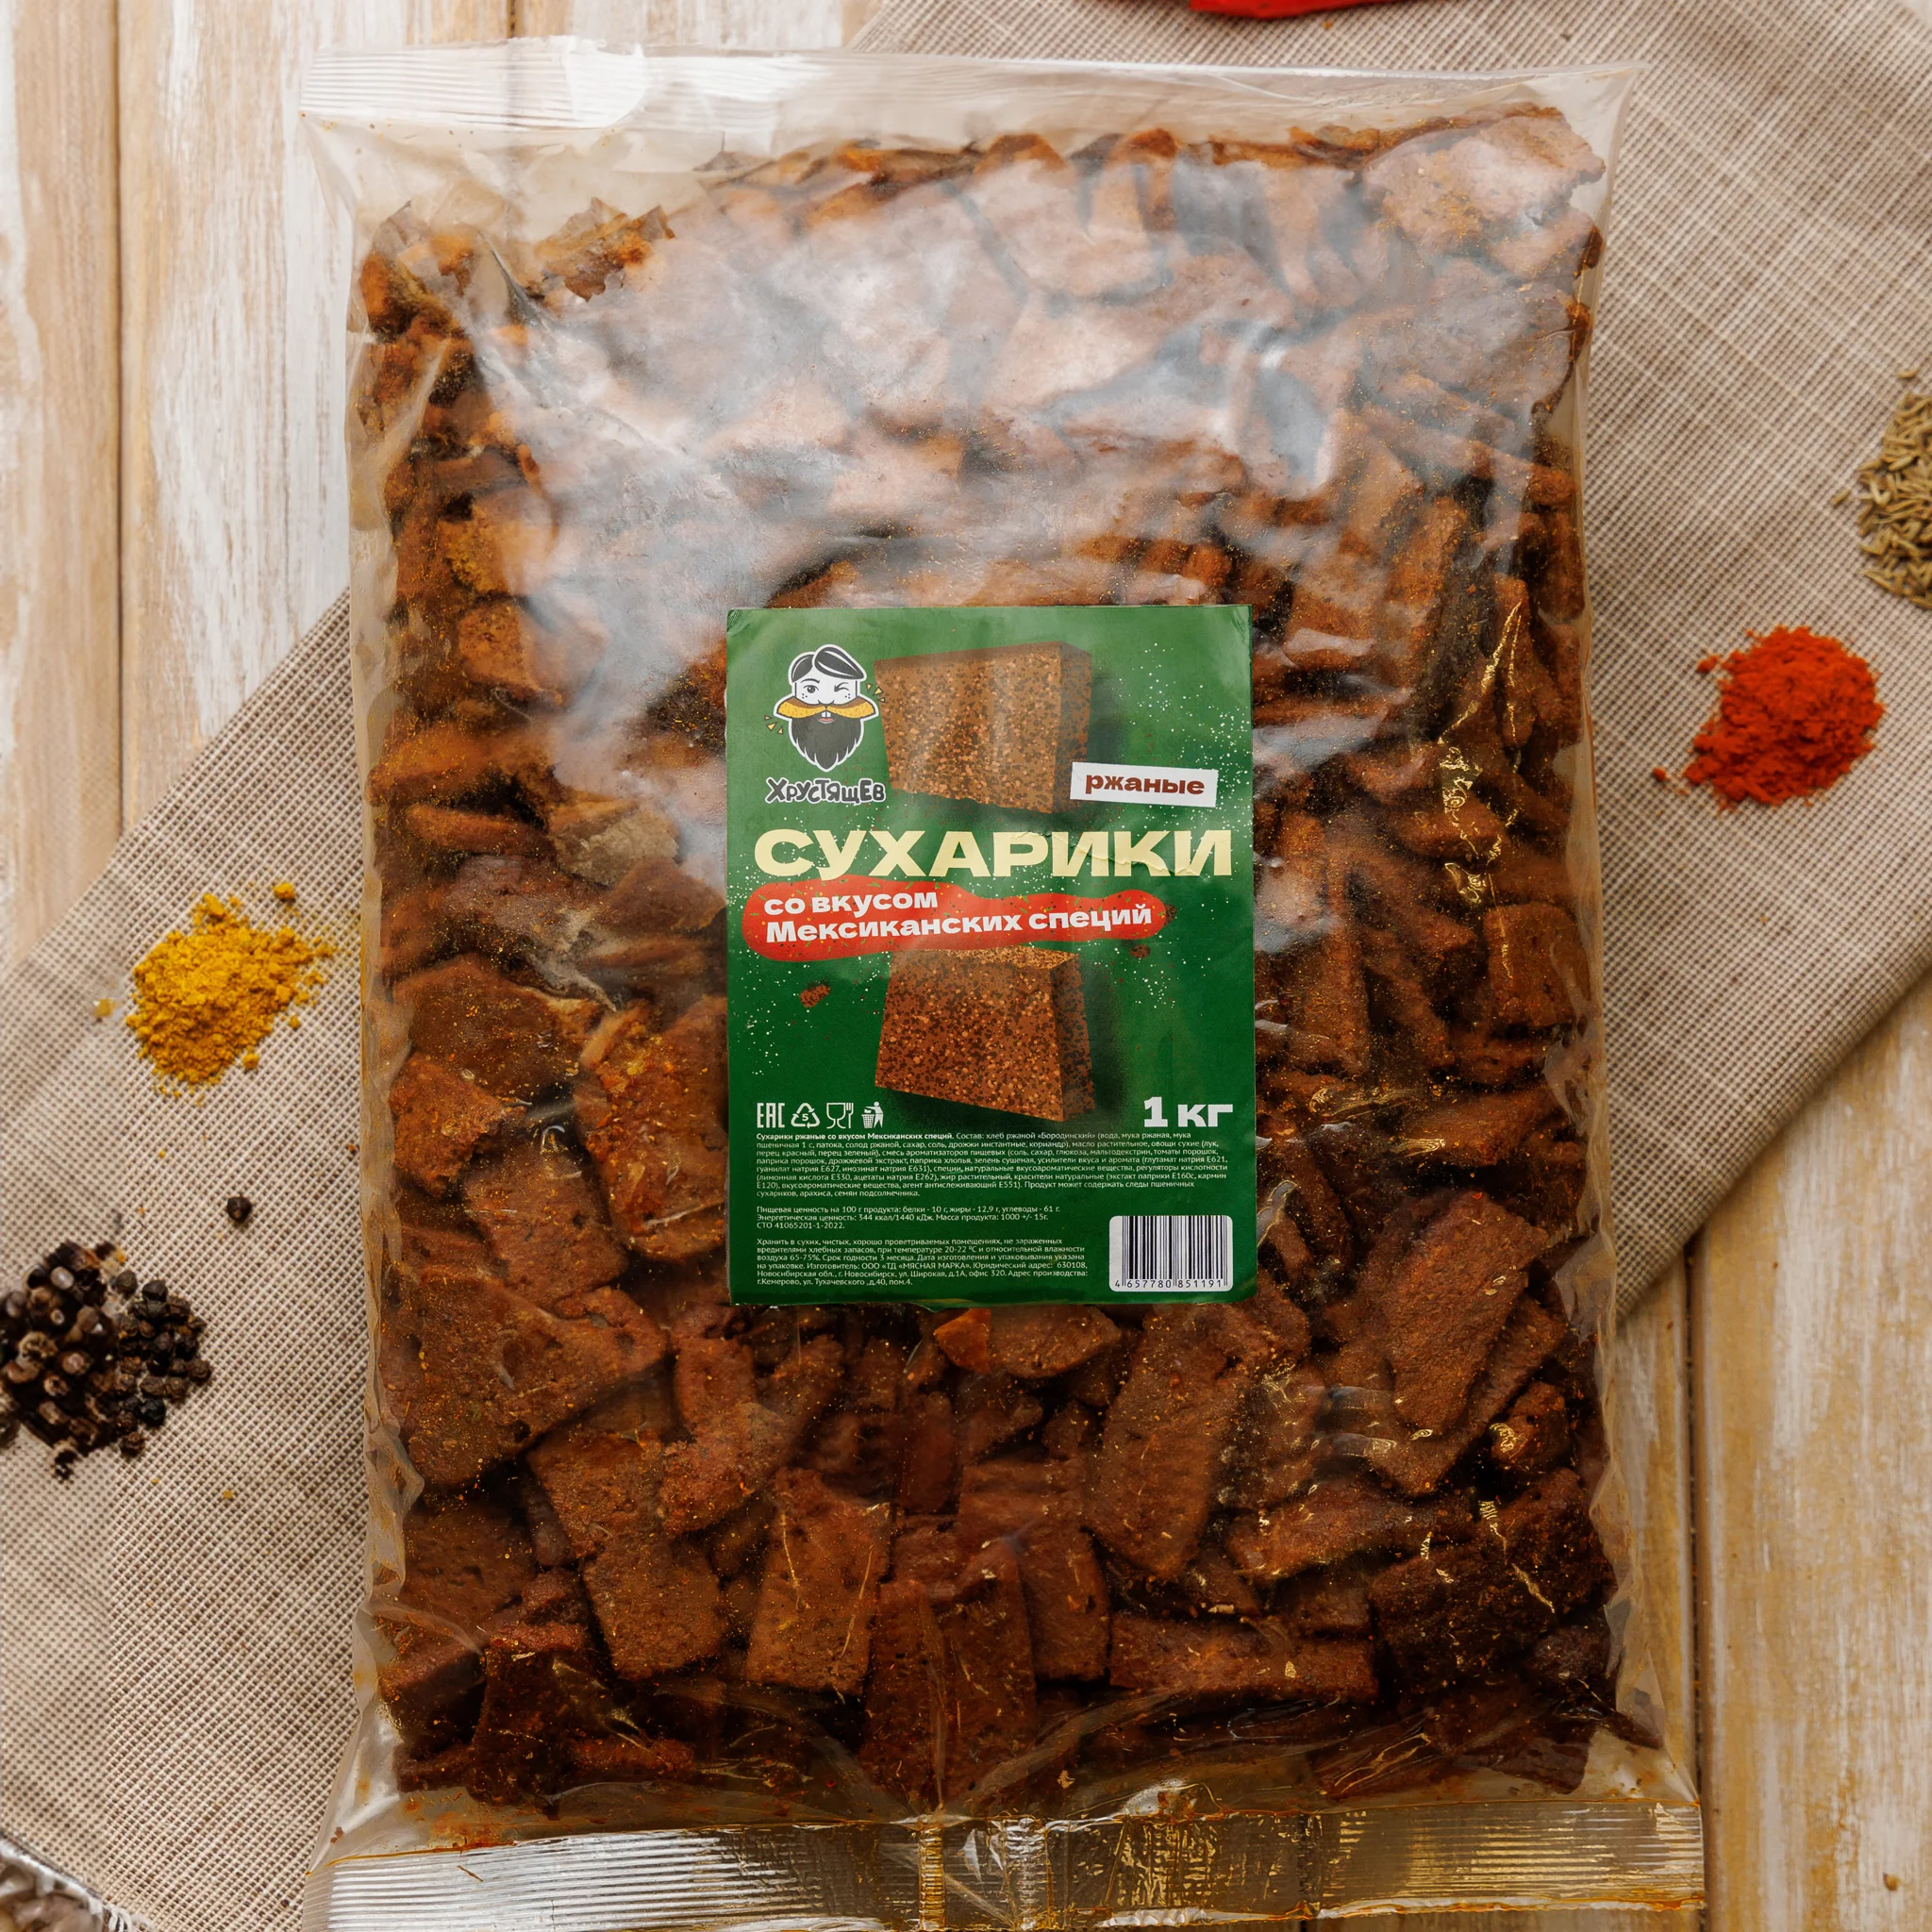 Rye "Borodinsky" crackers with Mexican spices 1 kg / "Borodinsky" crackers with Mexican spices 1000 gr / Croutons / Snacks for soup